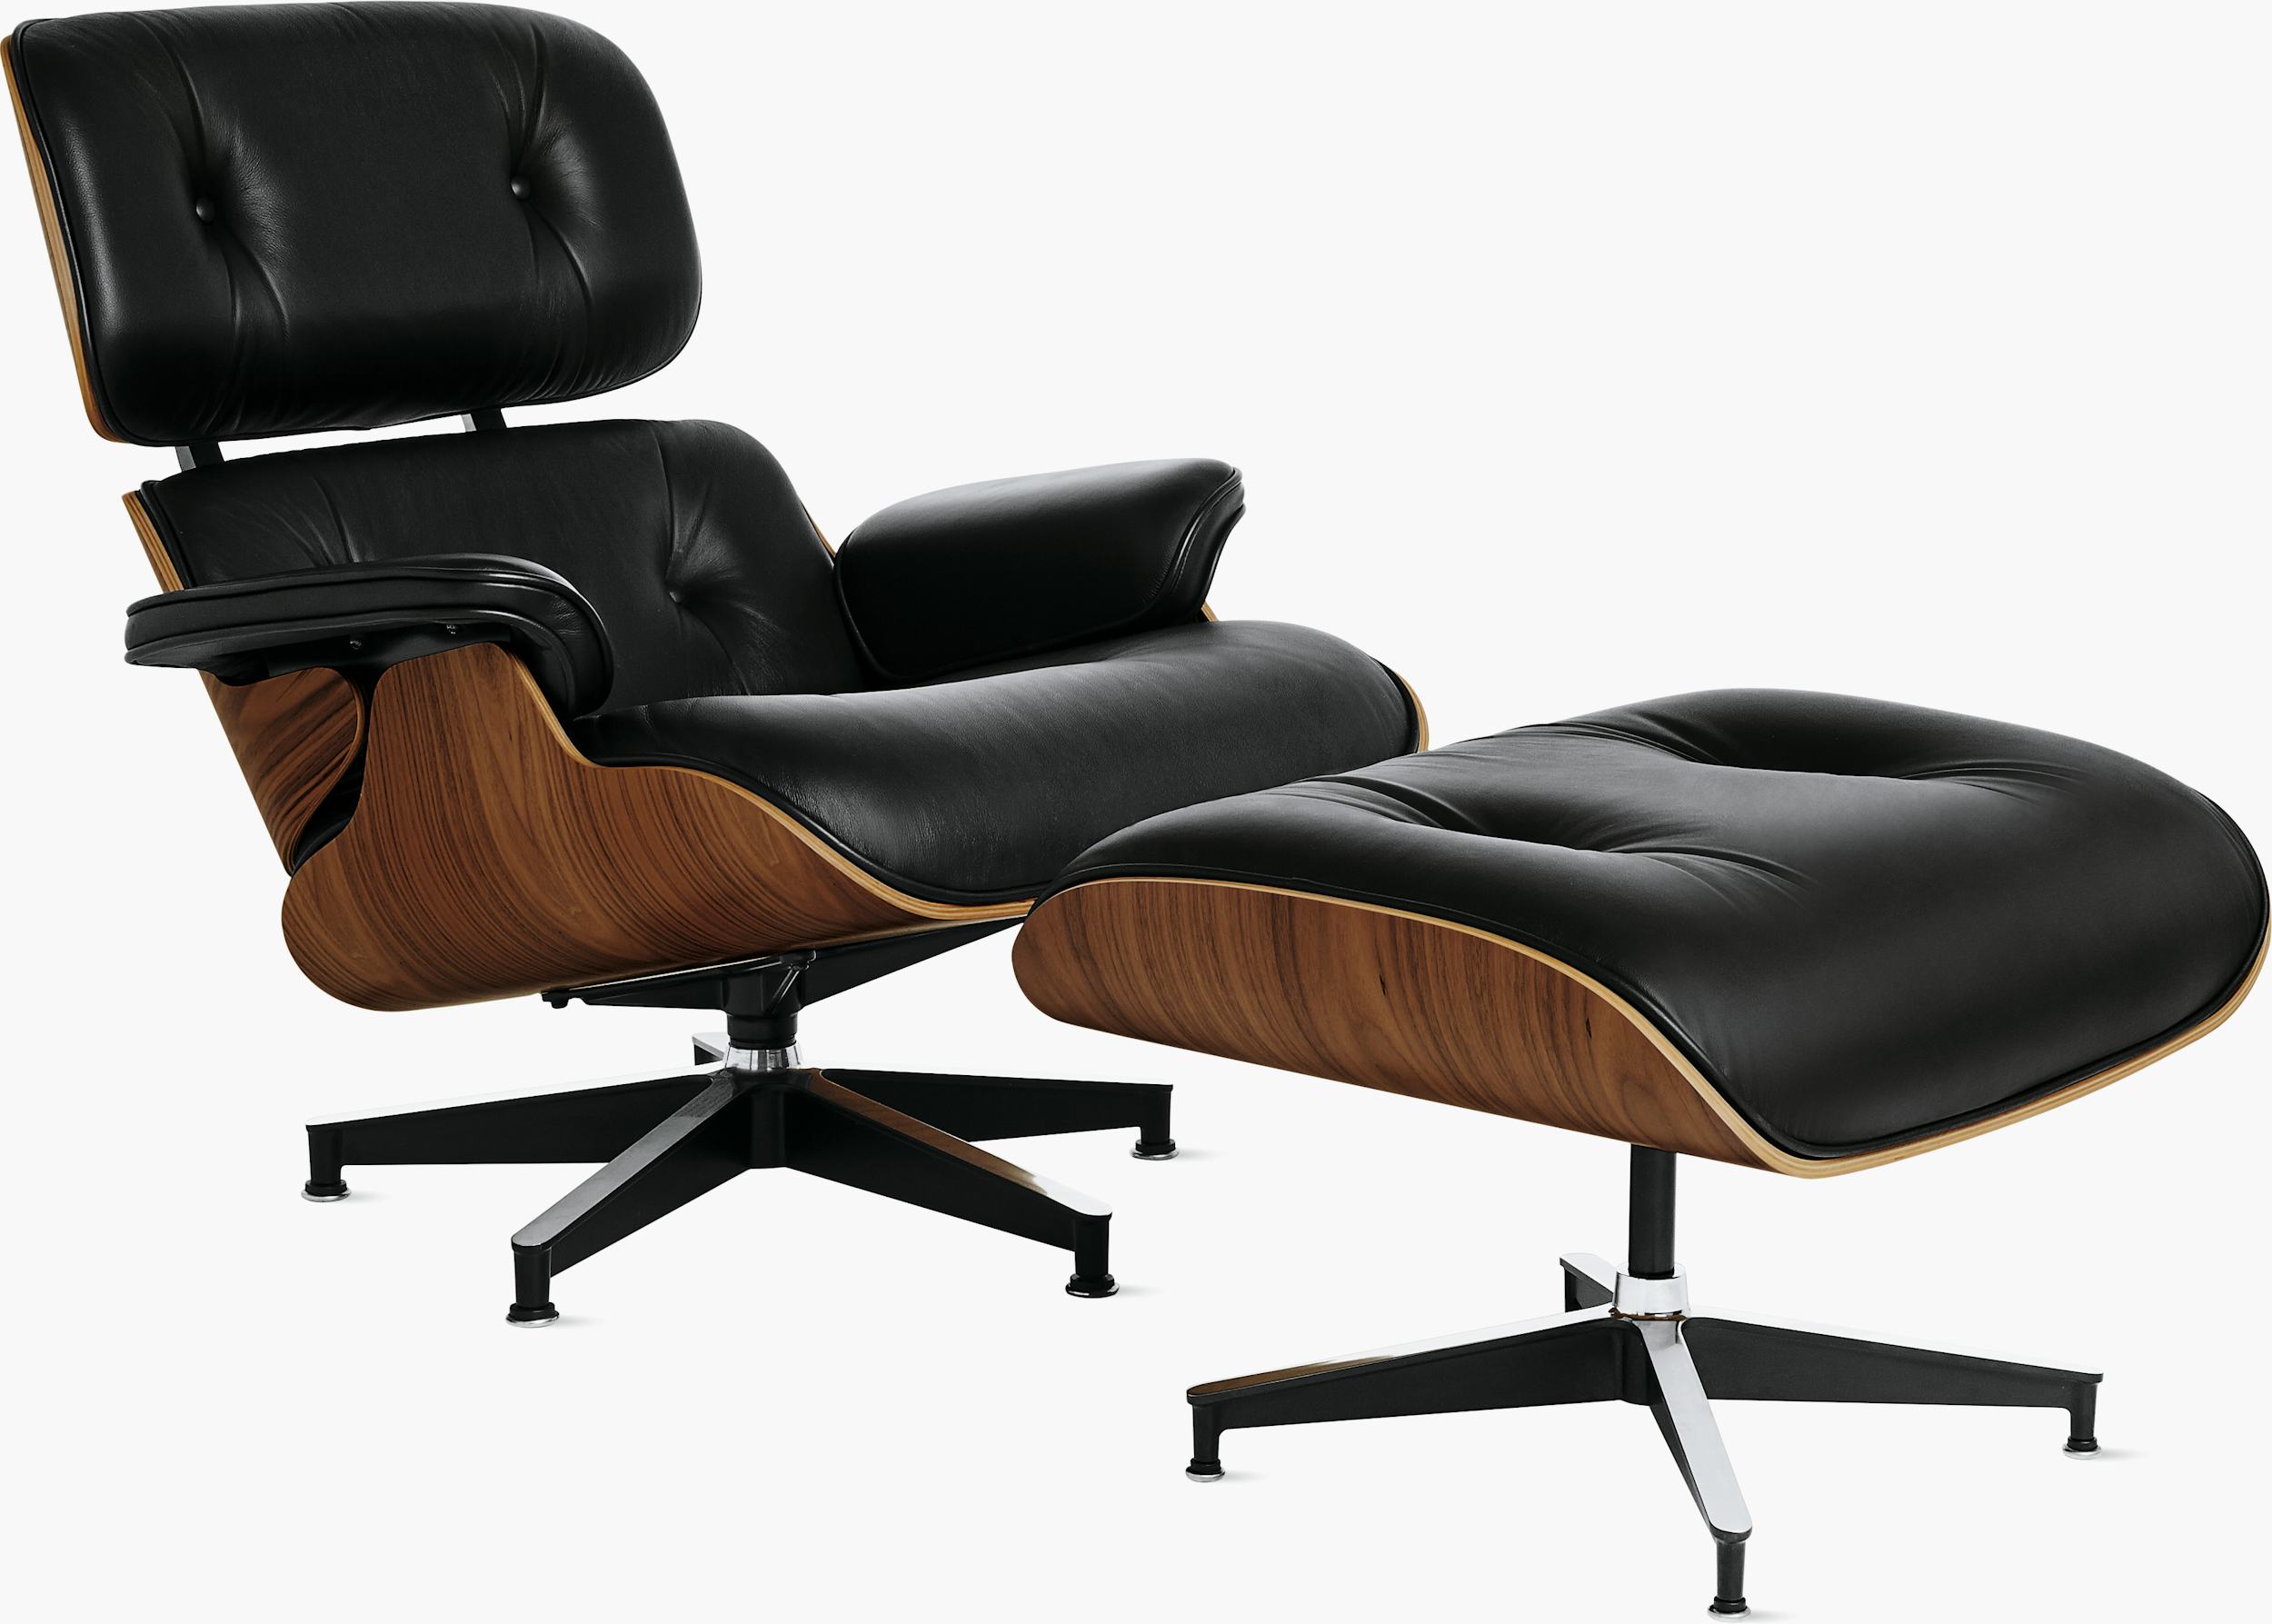 Eames Lounge Within Ottoman – Chair Reach Design and